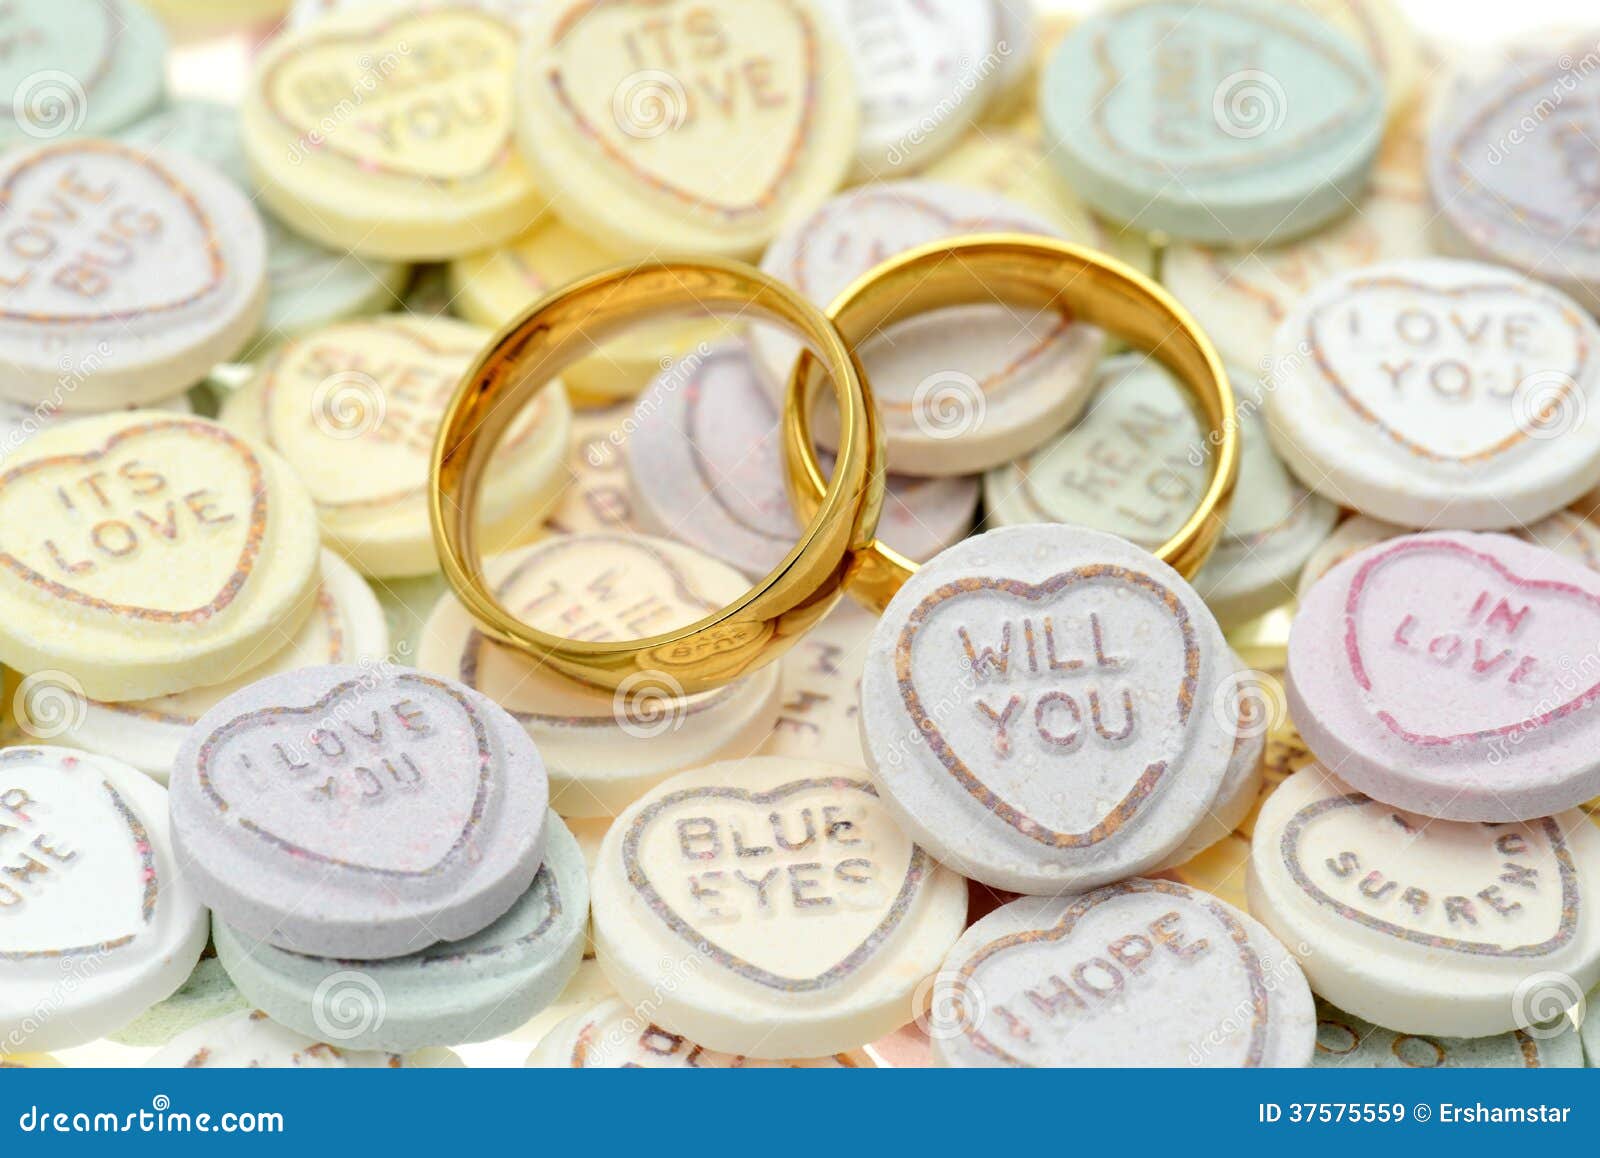 wedding rings and loveheart candy sweets